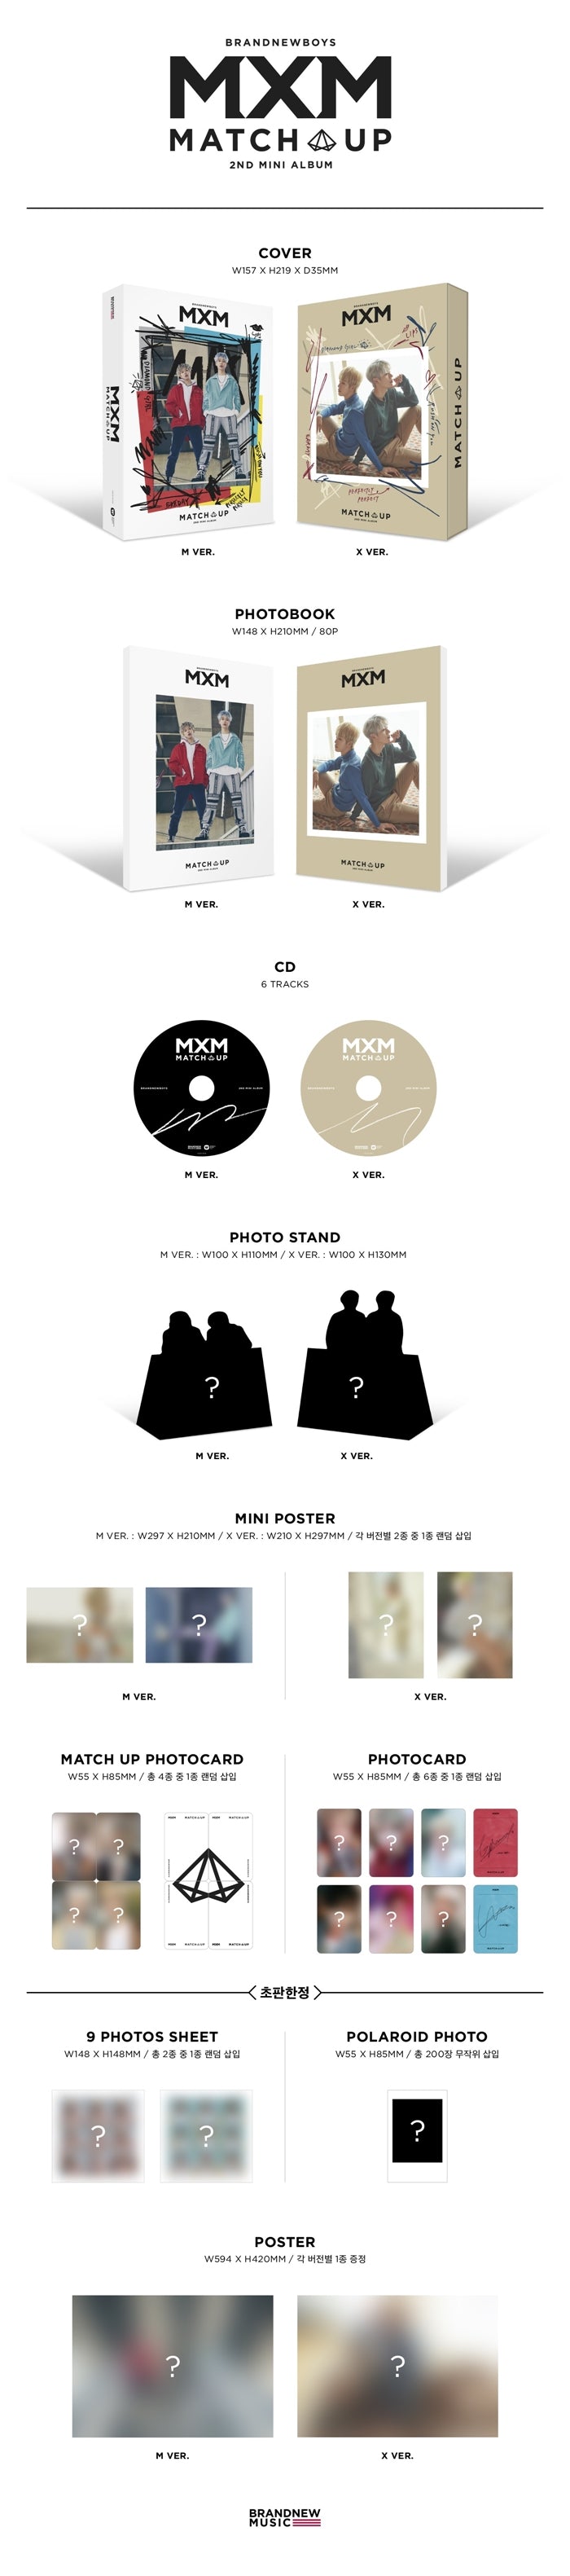 1 CD
1 Mini Posteron
1 Photo Book (80 pages)
2 Photo Cards
1 Photo Stand